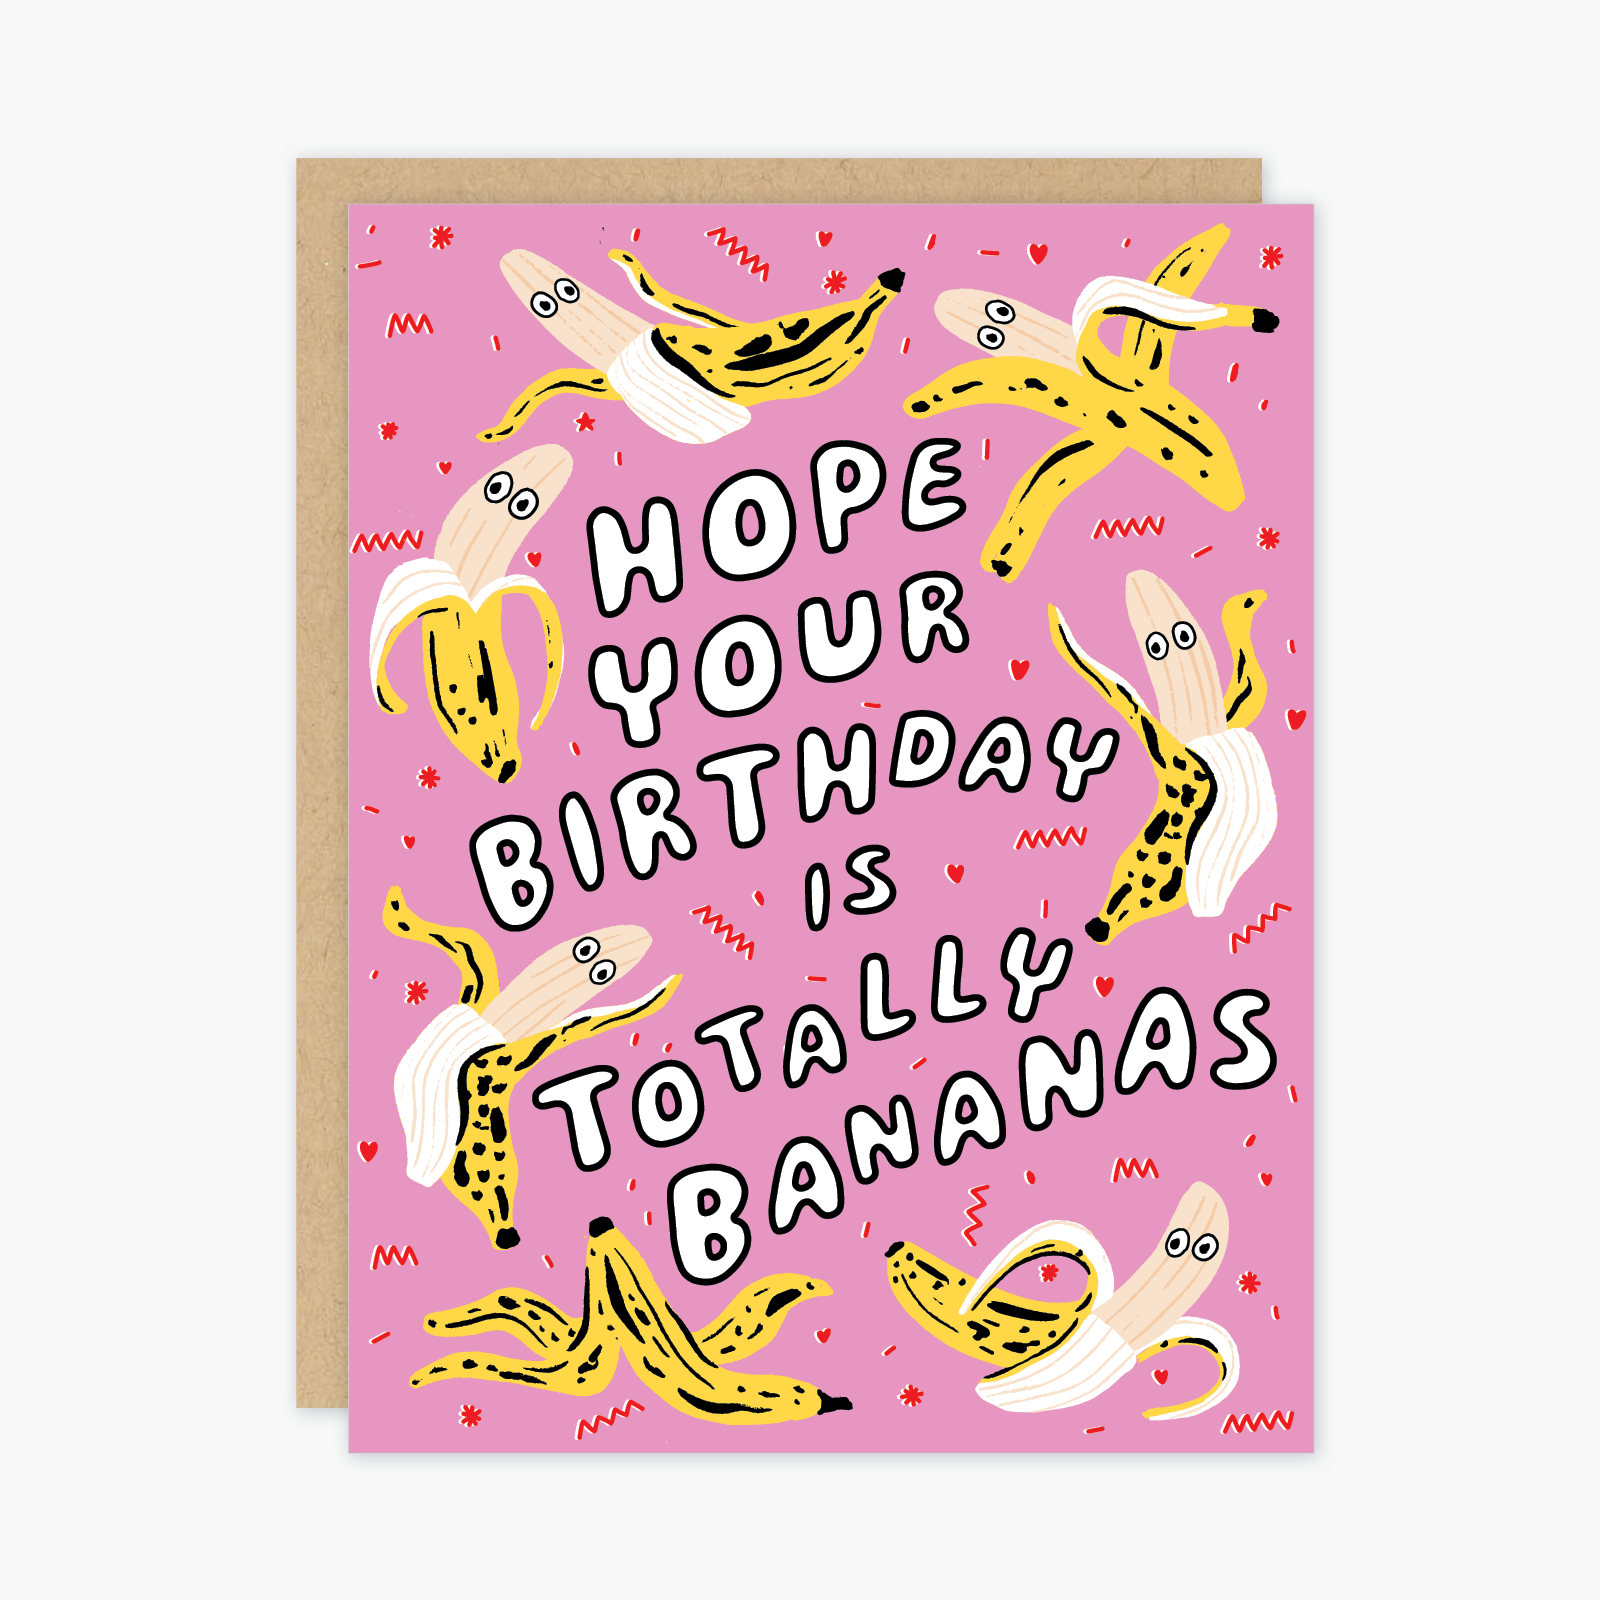 Illustration of six half-peeled bananas with peeking eyes and one banana peel with brown spots, all on a pink background with red and white confetti. Bubbly white text reads "Hope your birthday is totally bananas."